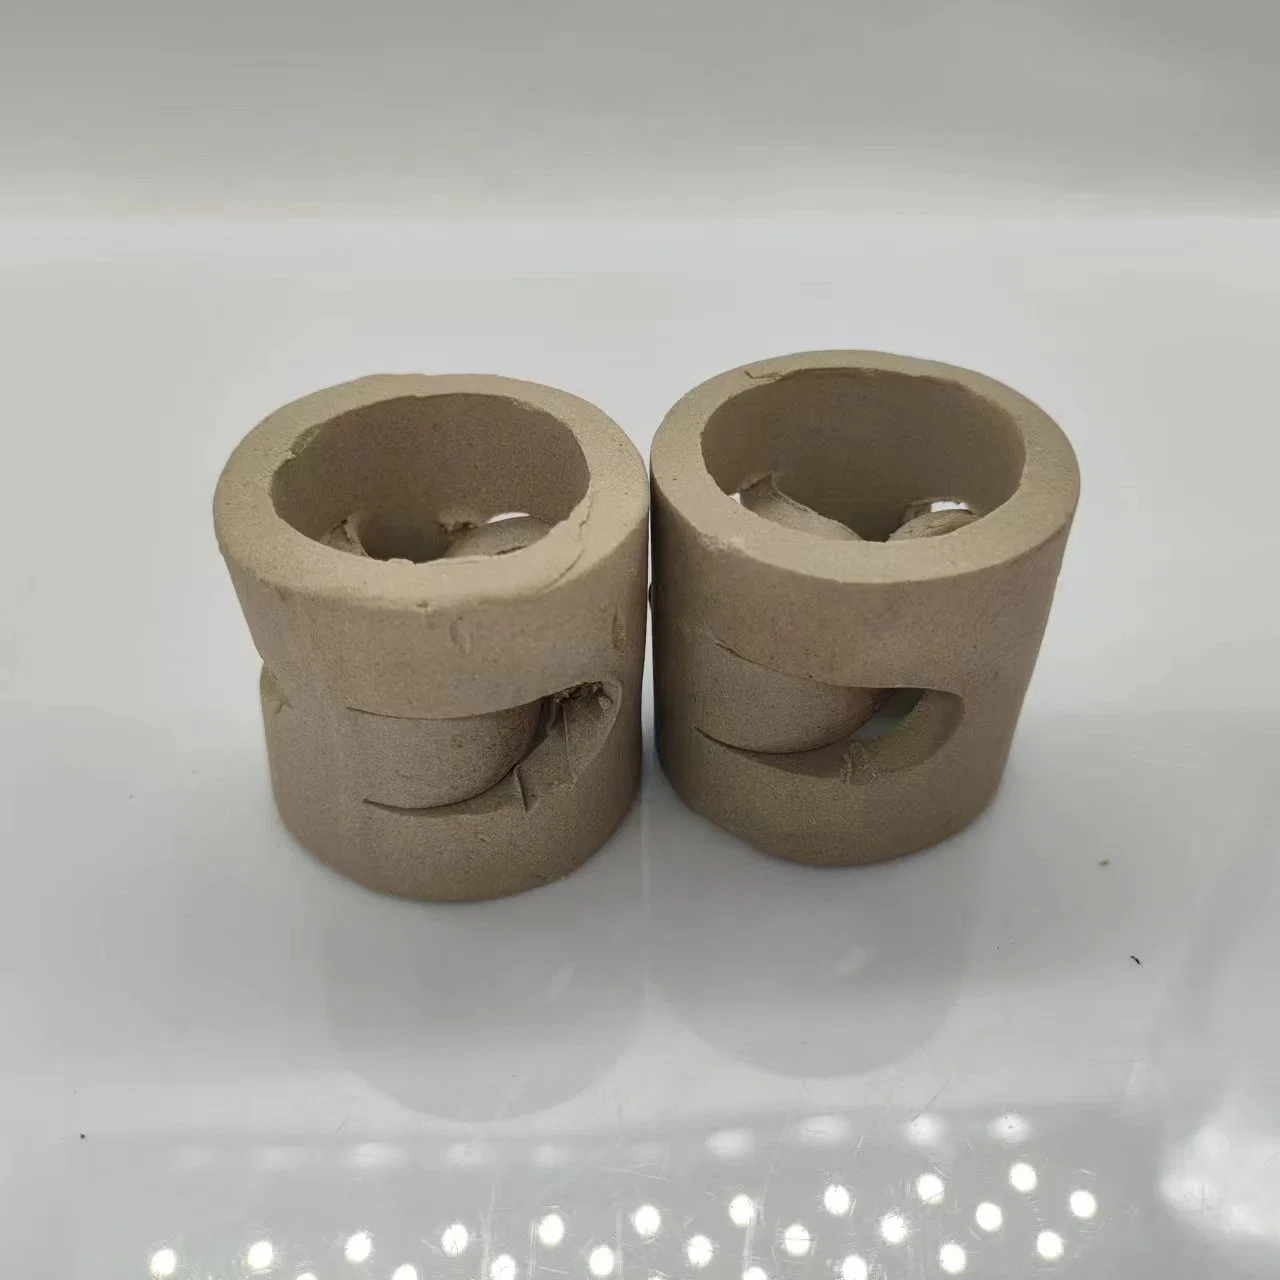 25mm 50mm Ceramic Pall Rings Tower Packing for Distillation Column Packing